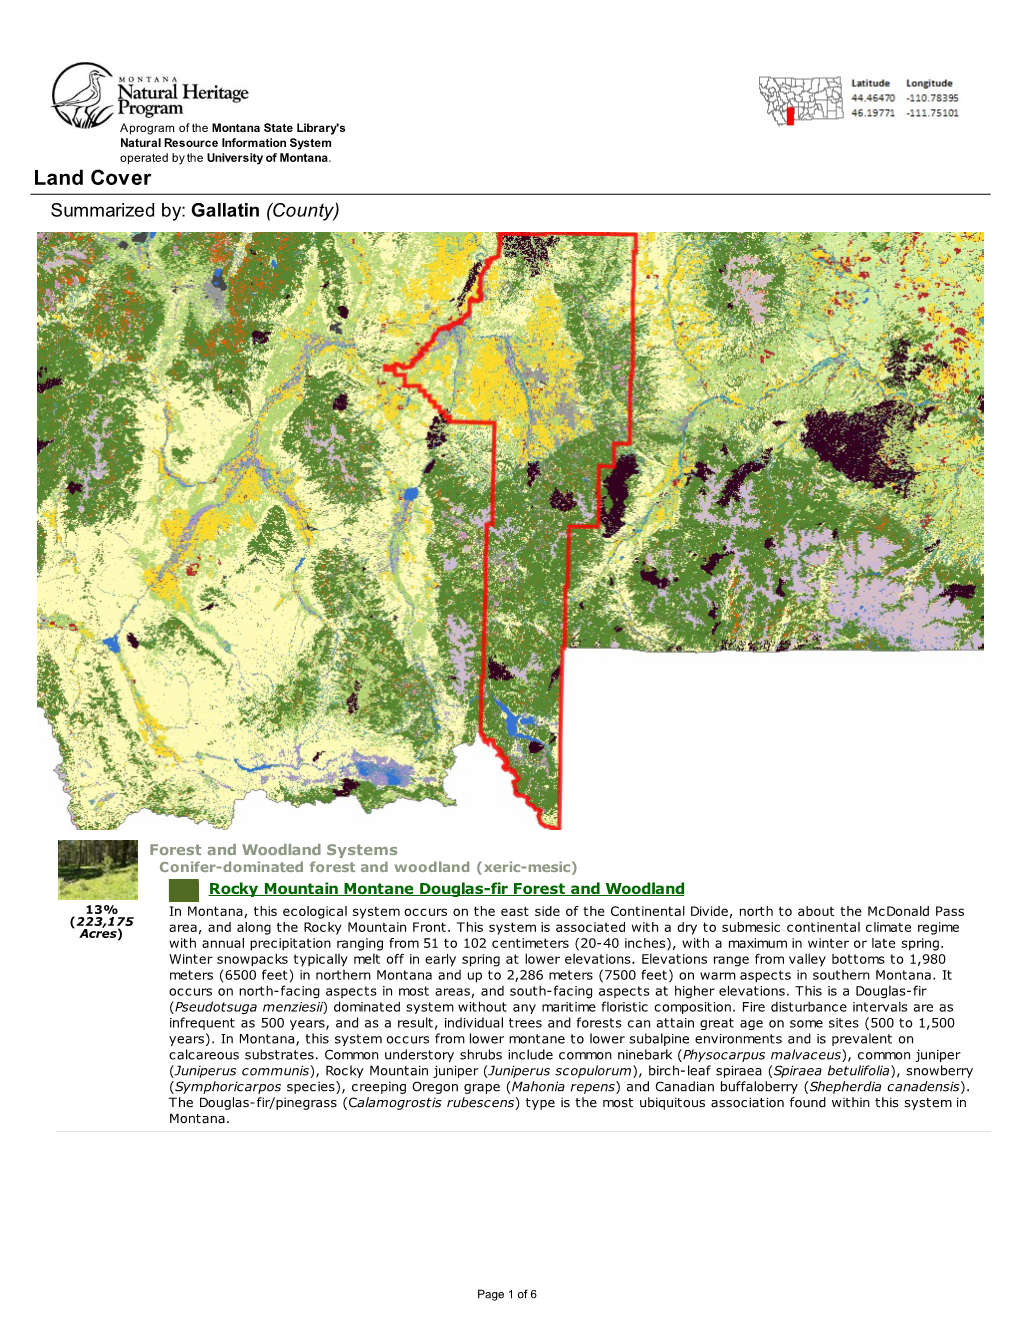 Land Cover Summarized By: Gallatin (County)